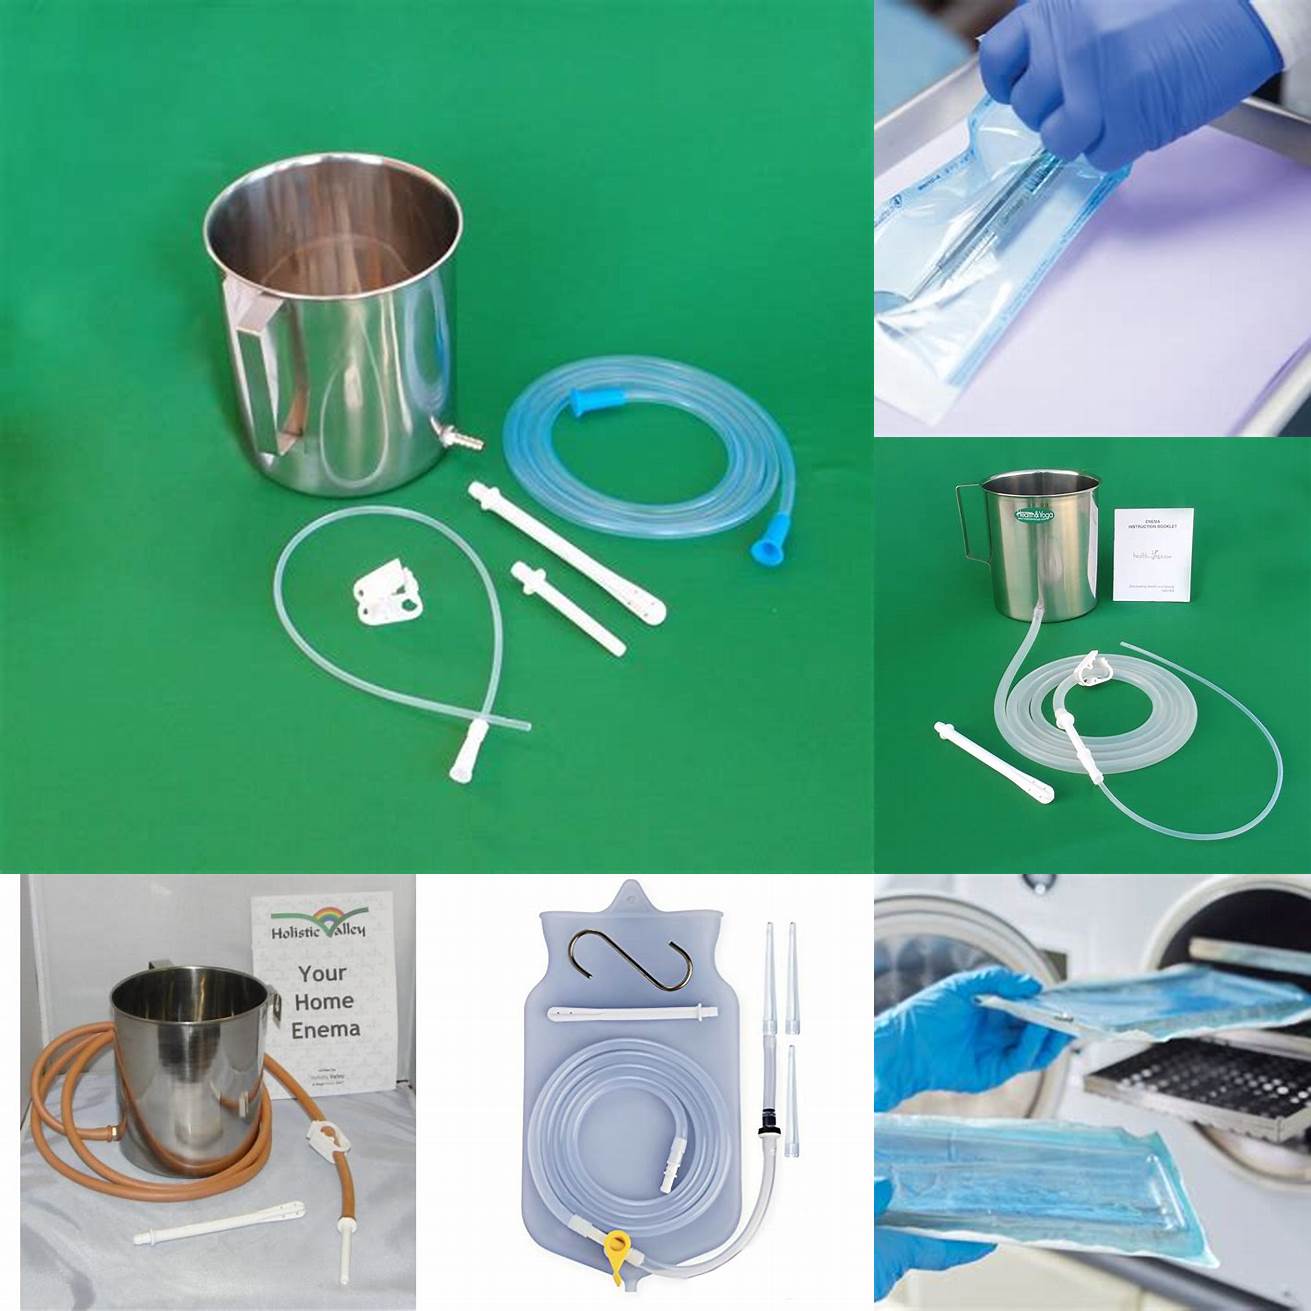 Systemic Infection If the equipment used for the enema is not properly sterilized it can lead to the transmission of bacteria or other infectious agents